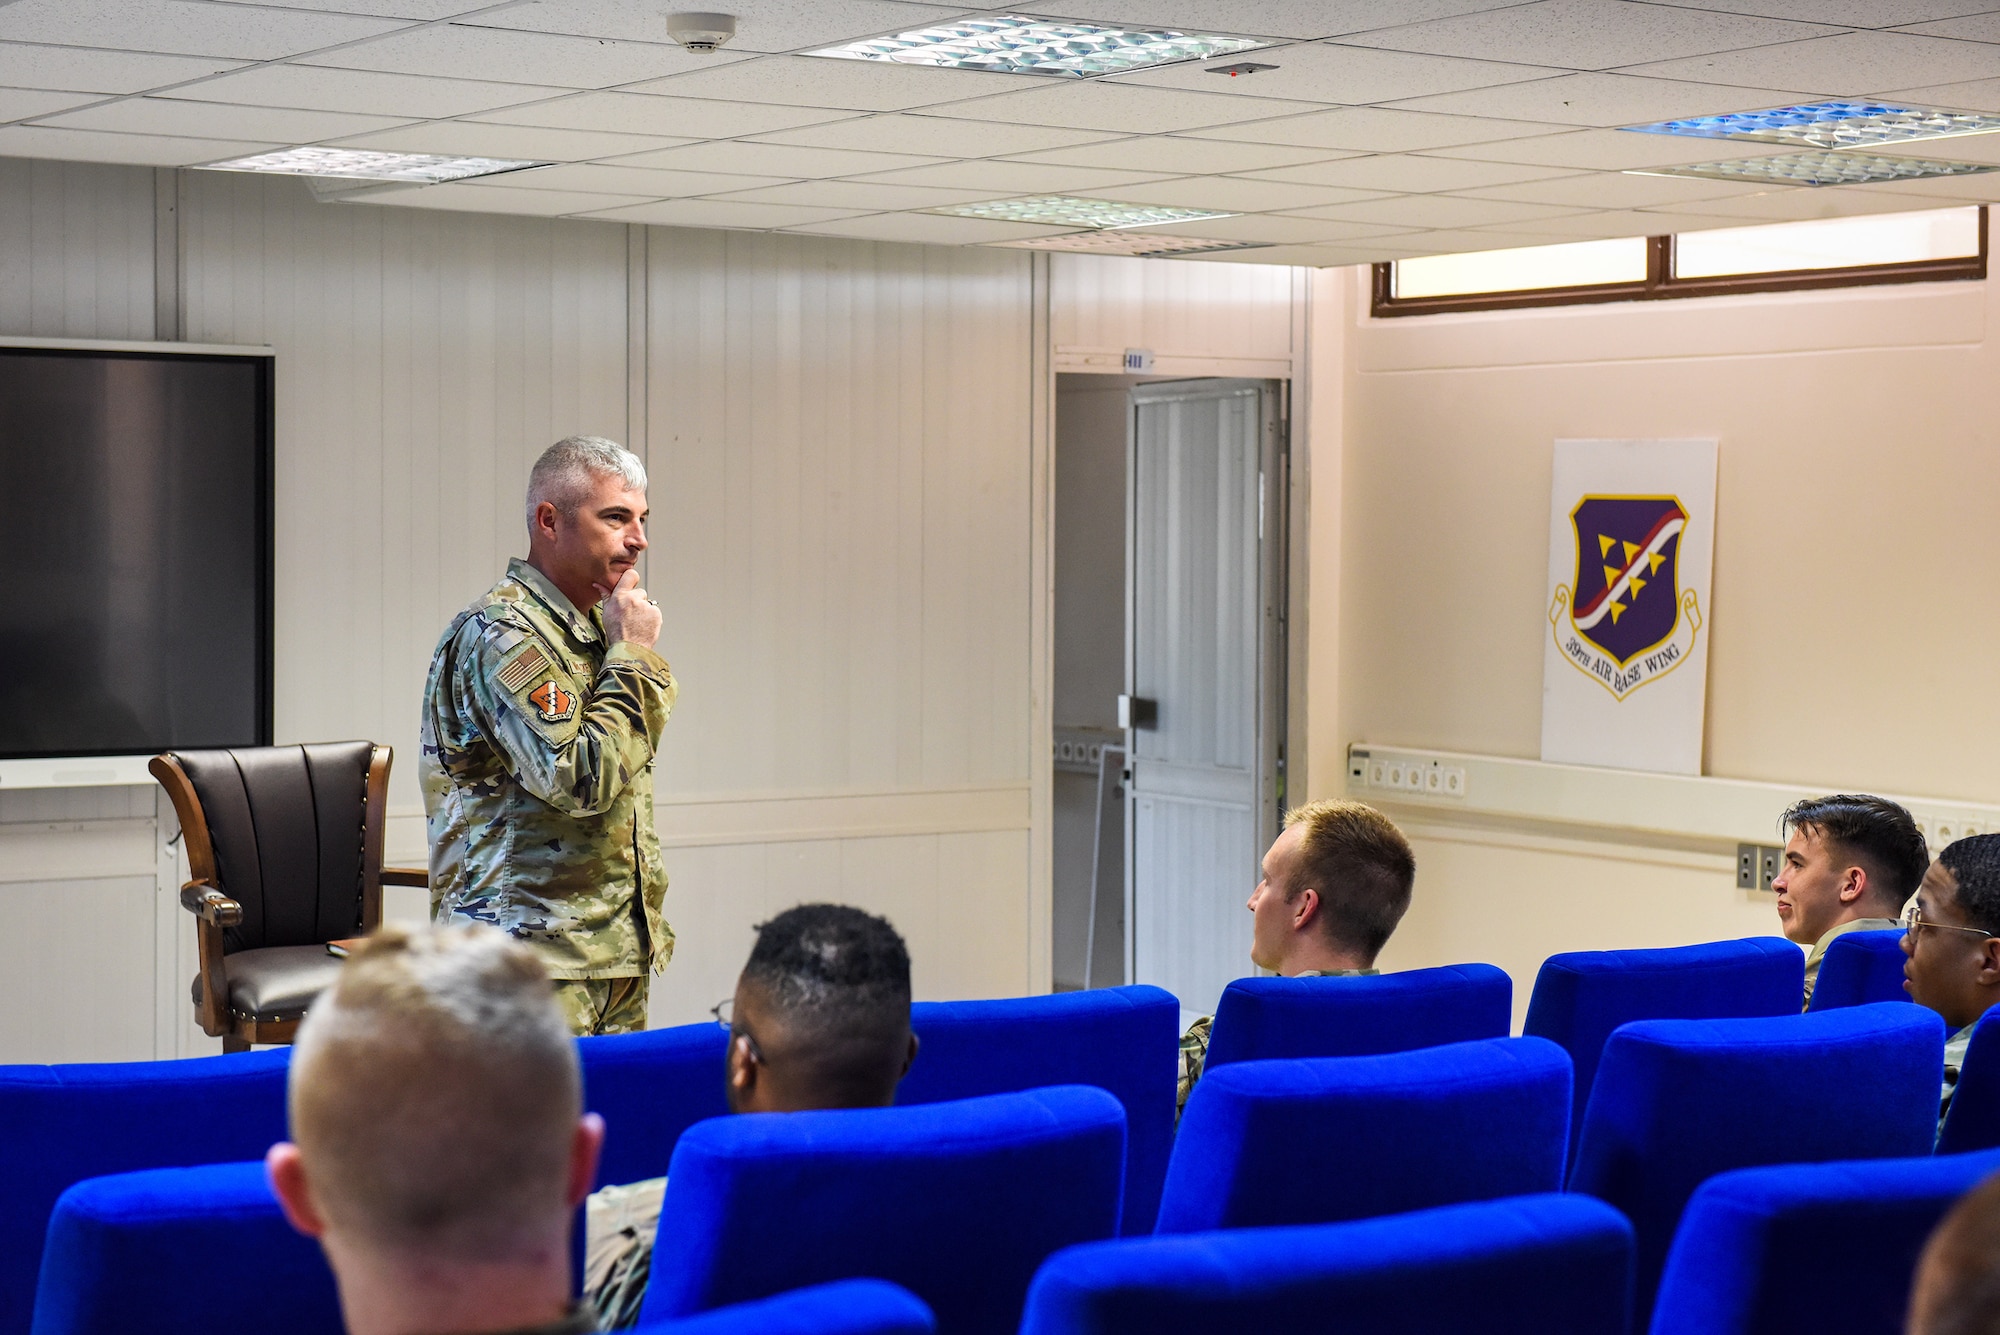 Col. Kevin McCaskey, 39th Air Base Wing (ABW) vice commander, gives a lecture to Airmen of the 39th ABW attending Airman Leadership School (ALS) Class 22-F in the ALS classroom at Incirlik Air Base, Turkey, Aug. 8, 2022.